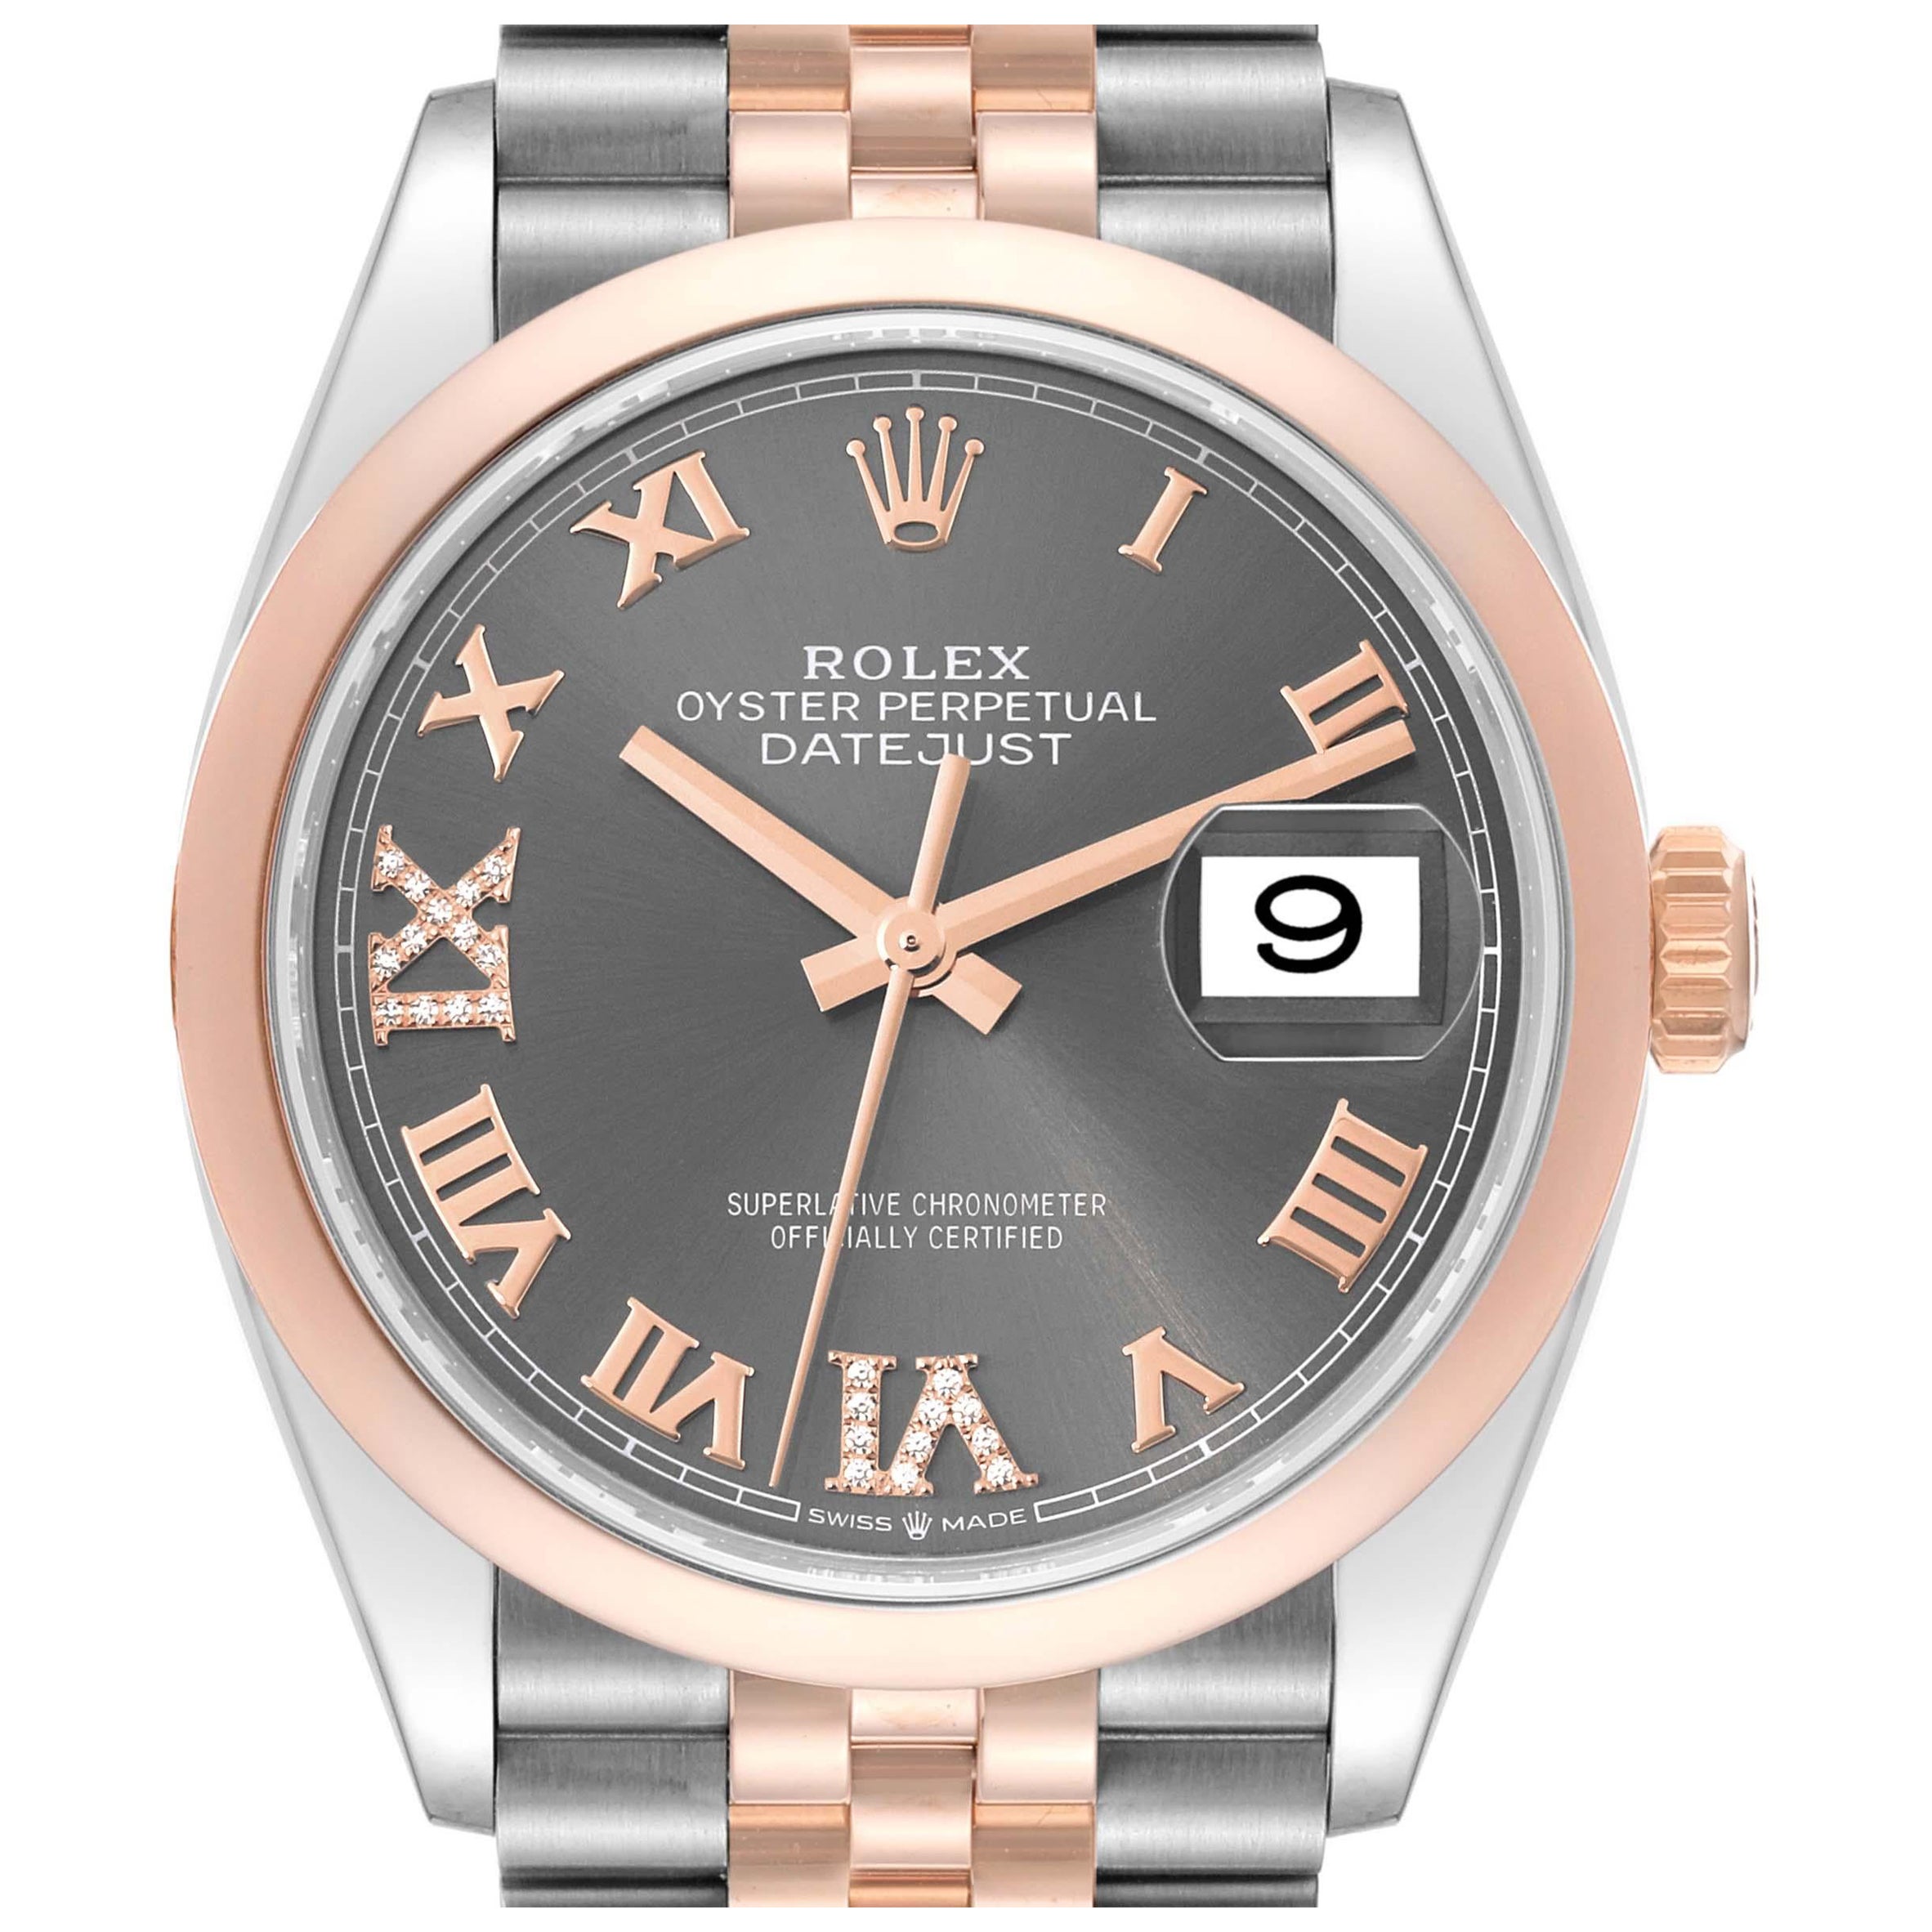 Rolex Datejust 36 Steel Rose Gold Slate Diamond Dial Mens Watch 126201 Box Card For Sale